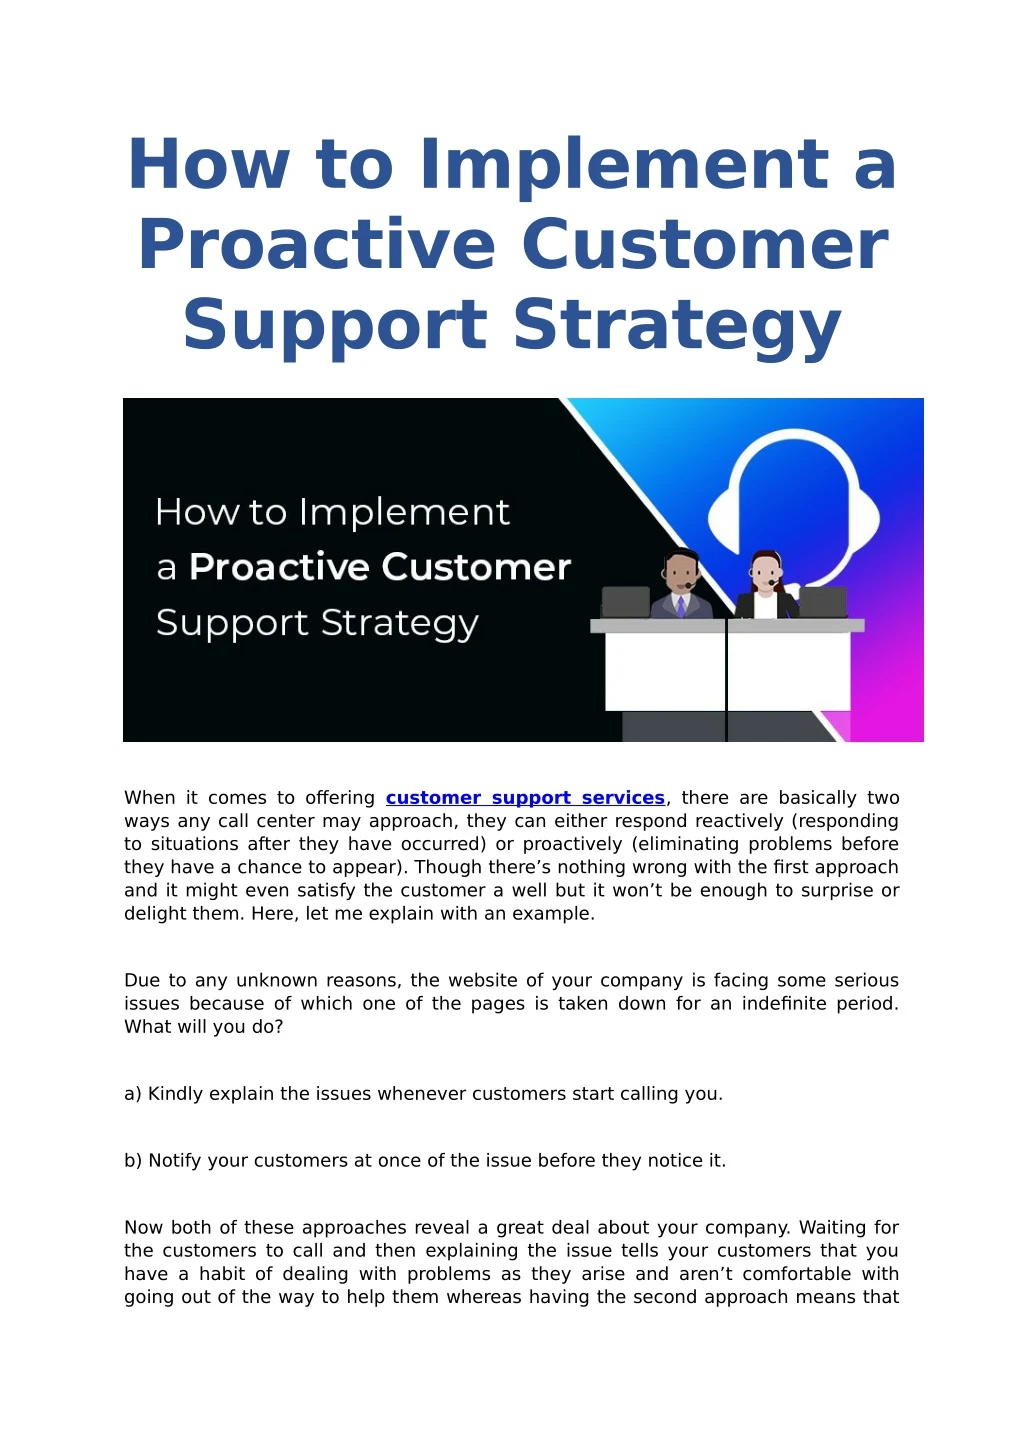 how to implement a proactive customer support